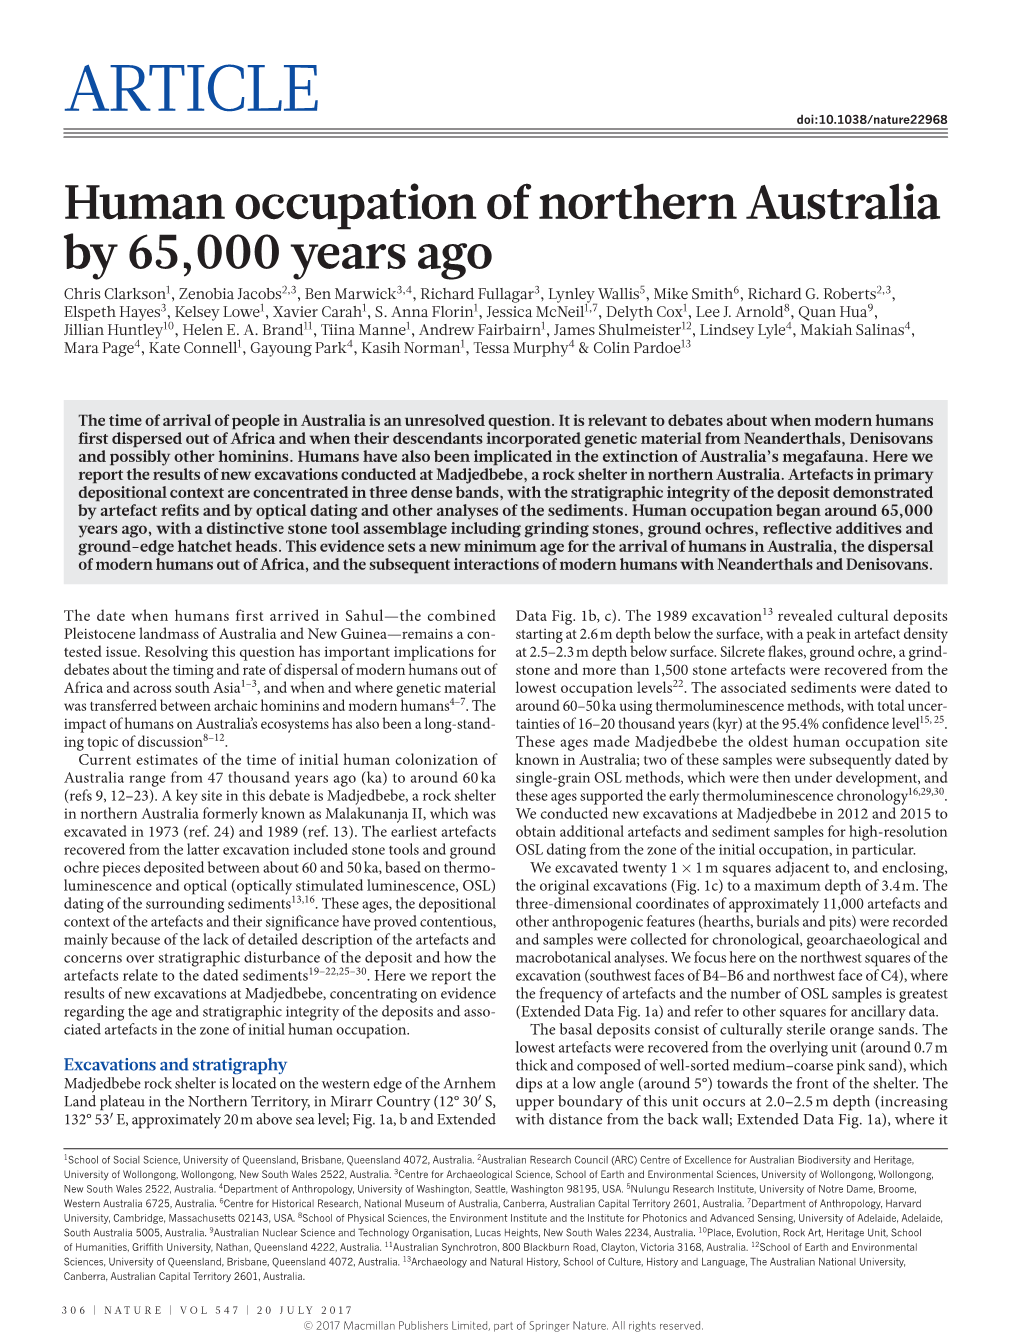 Human Occupation of Northern Australia by 65,000 Years